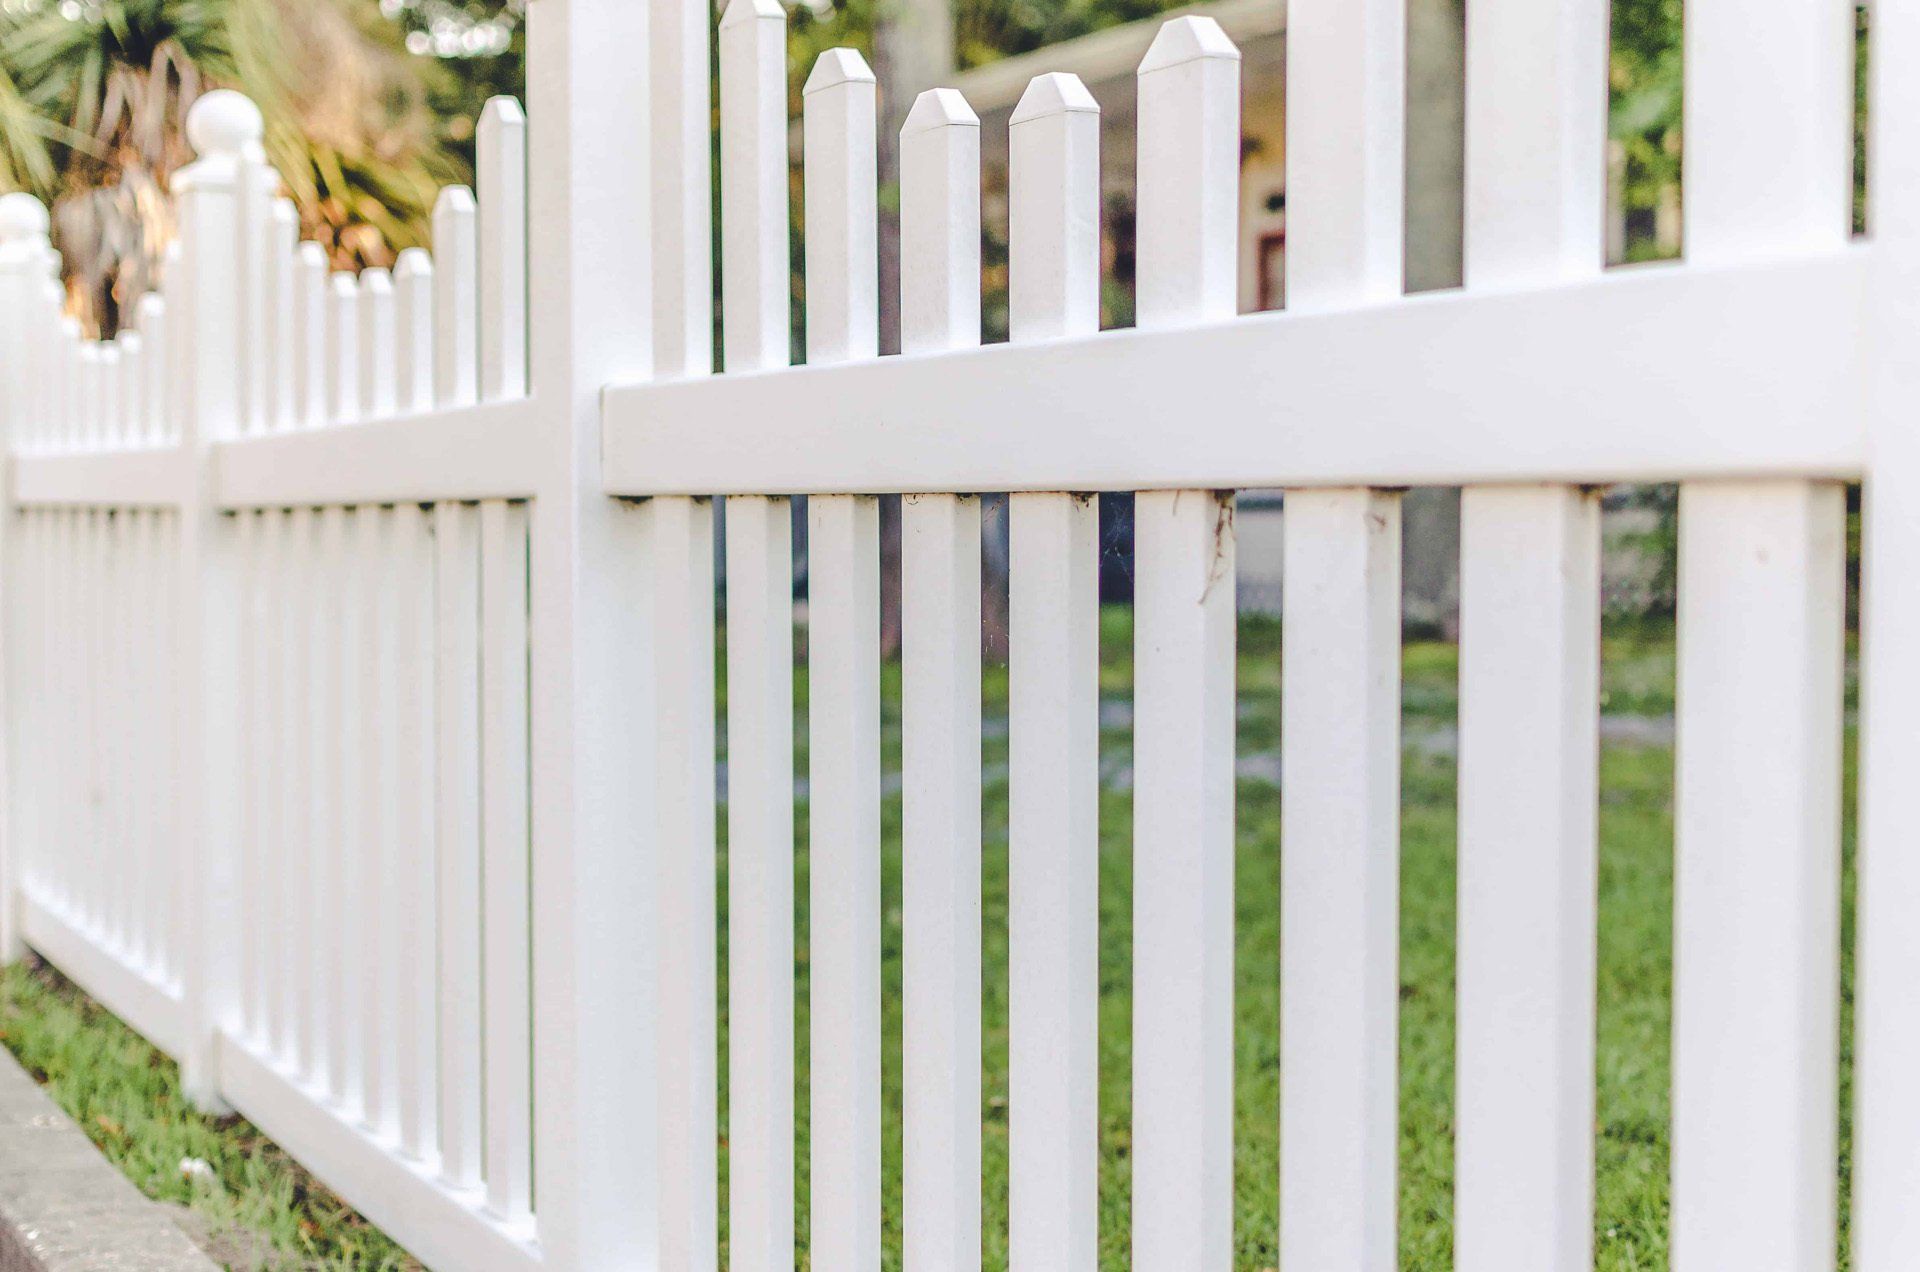 Vinyl fencing is a low maintenance fencing material